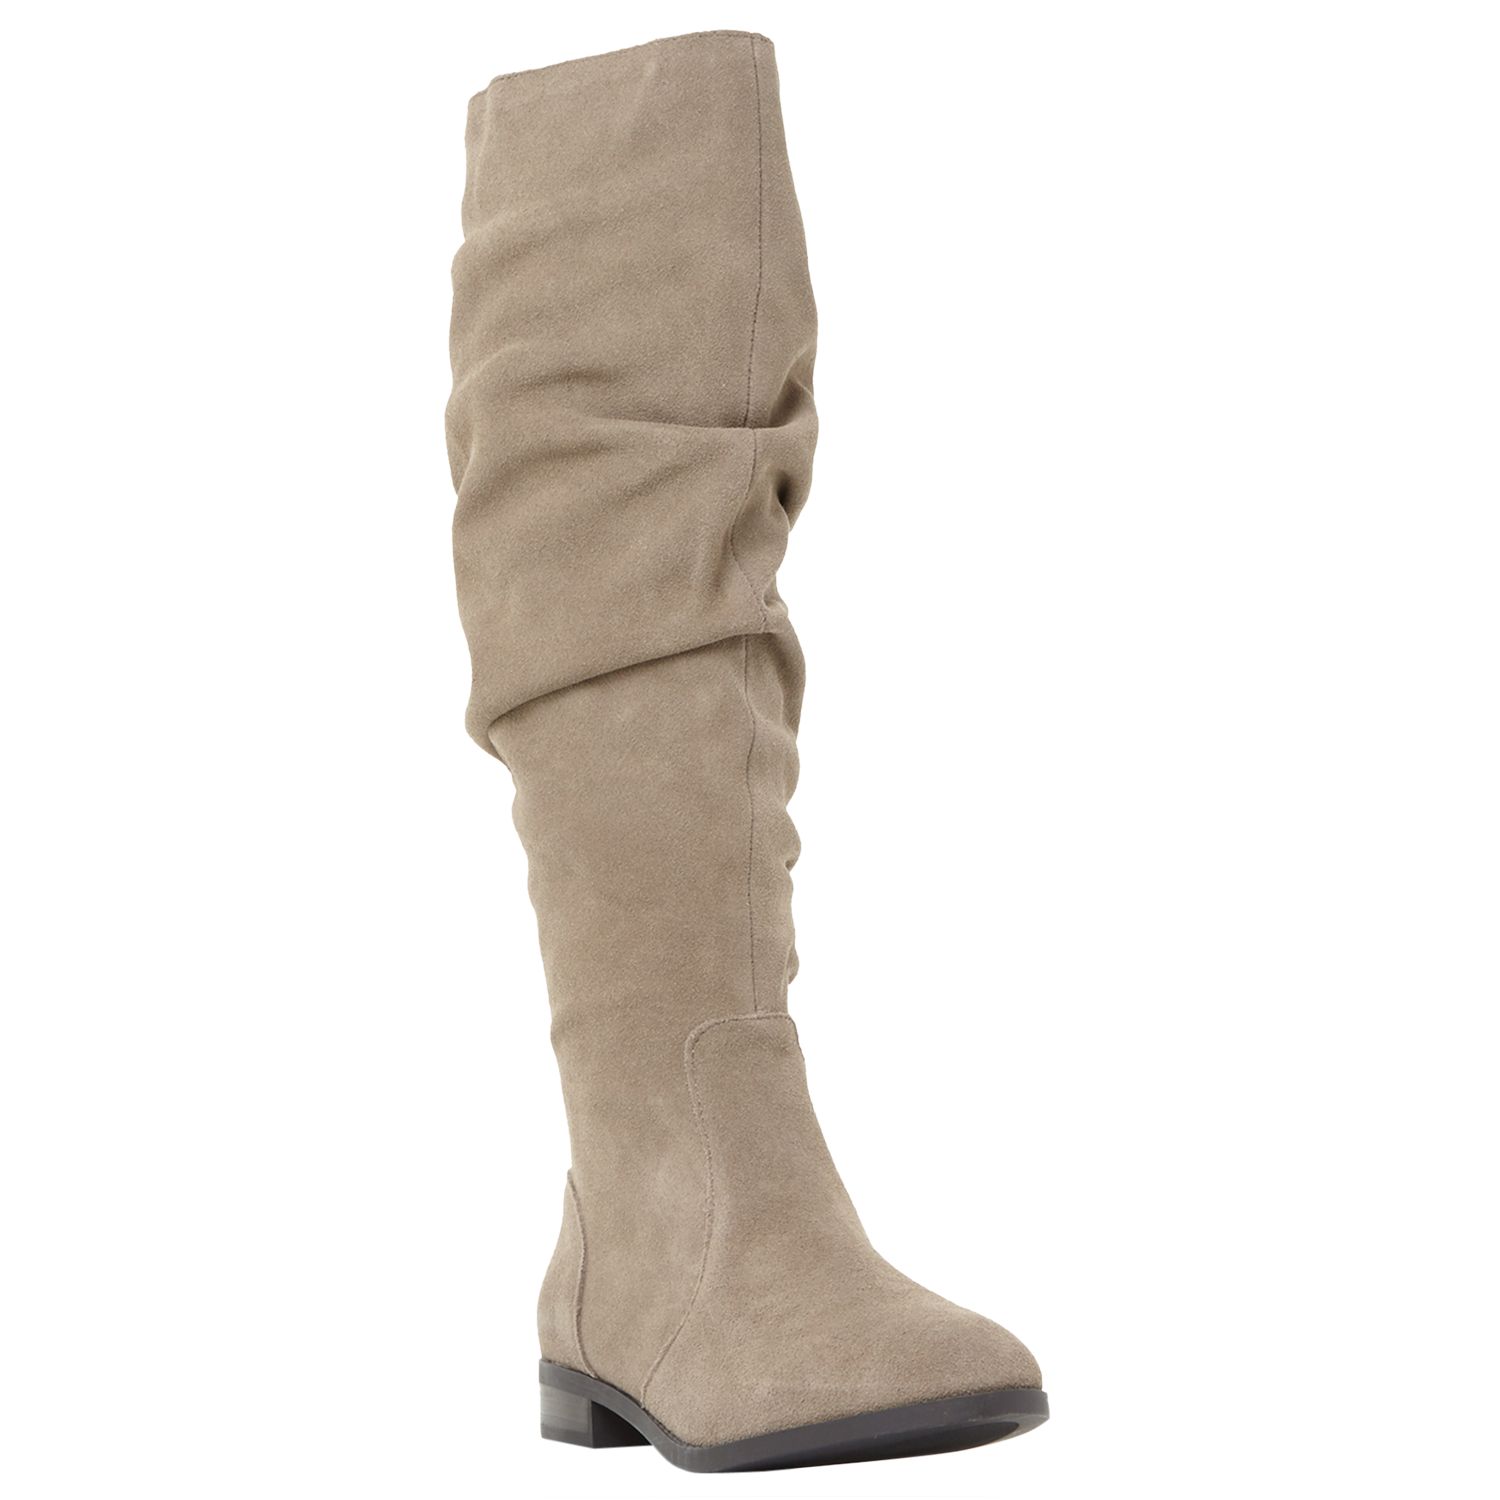 Steve Madden Beacon Ruched Knee High Boots, Taupe